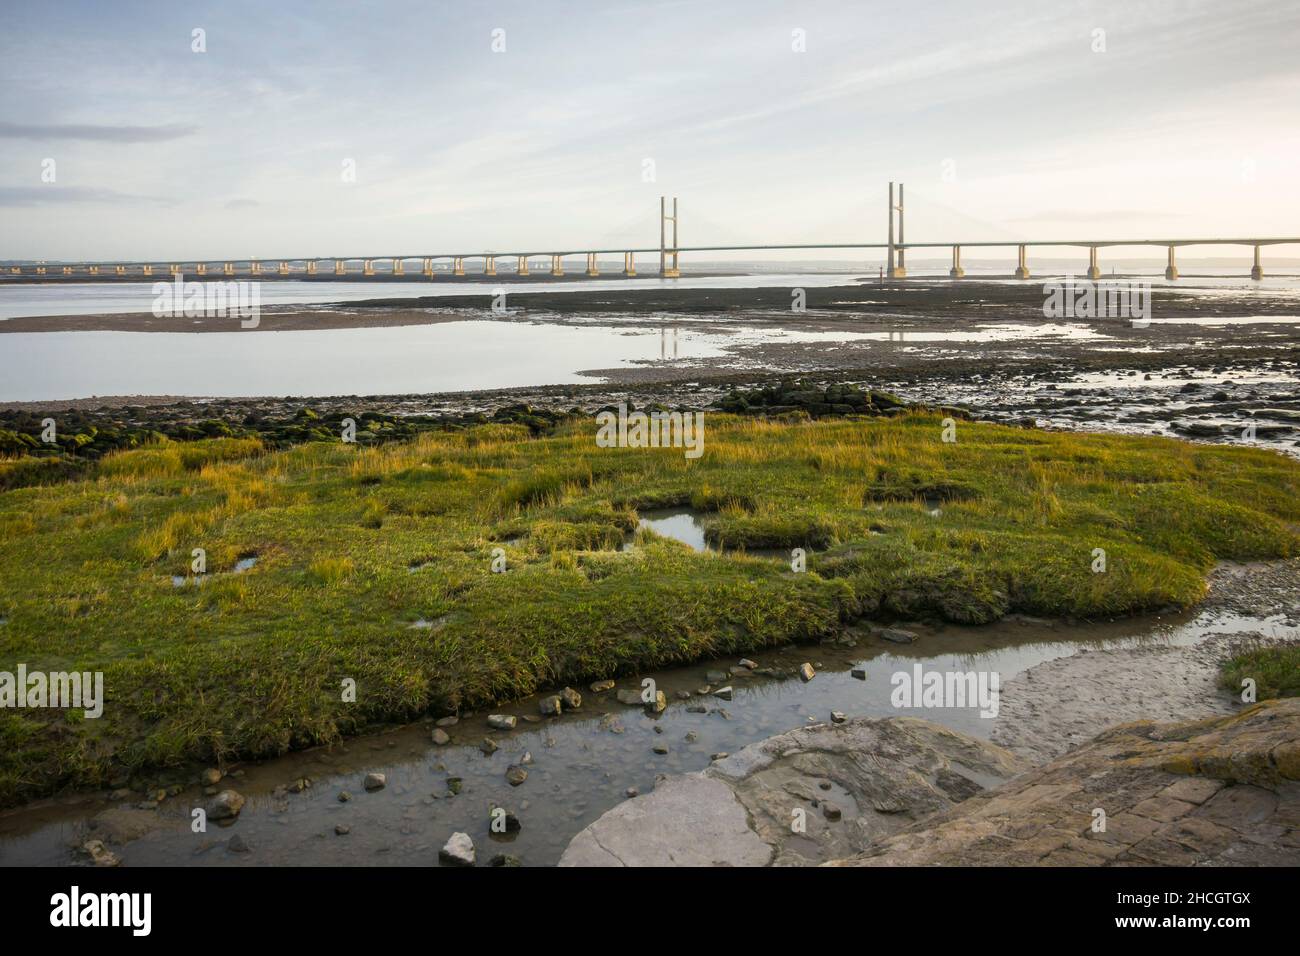 The Prince of Wales Bridge or Second Severn Crossing carrying the M4 over the Severn Estuary viewed from Black Rock, Portskewett in Gwent, Wales. Stock Photo